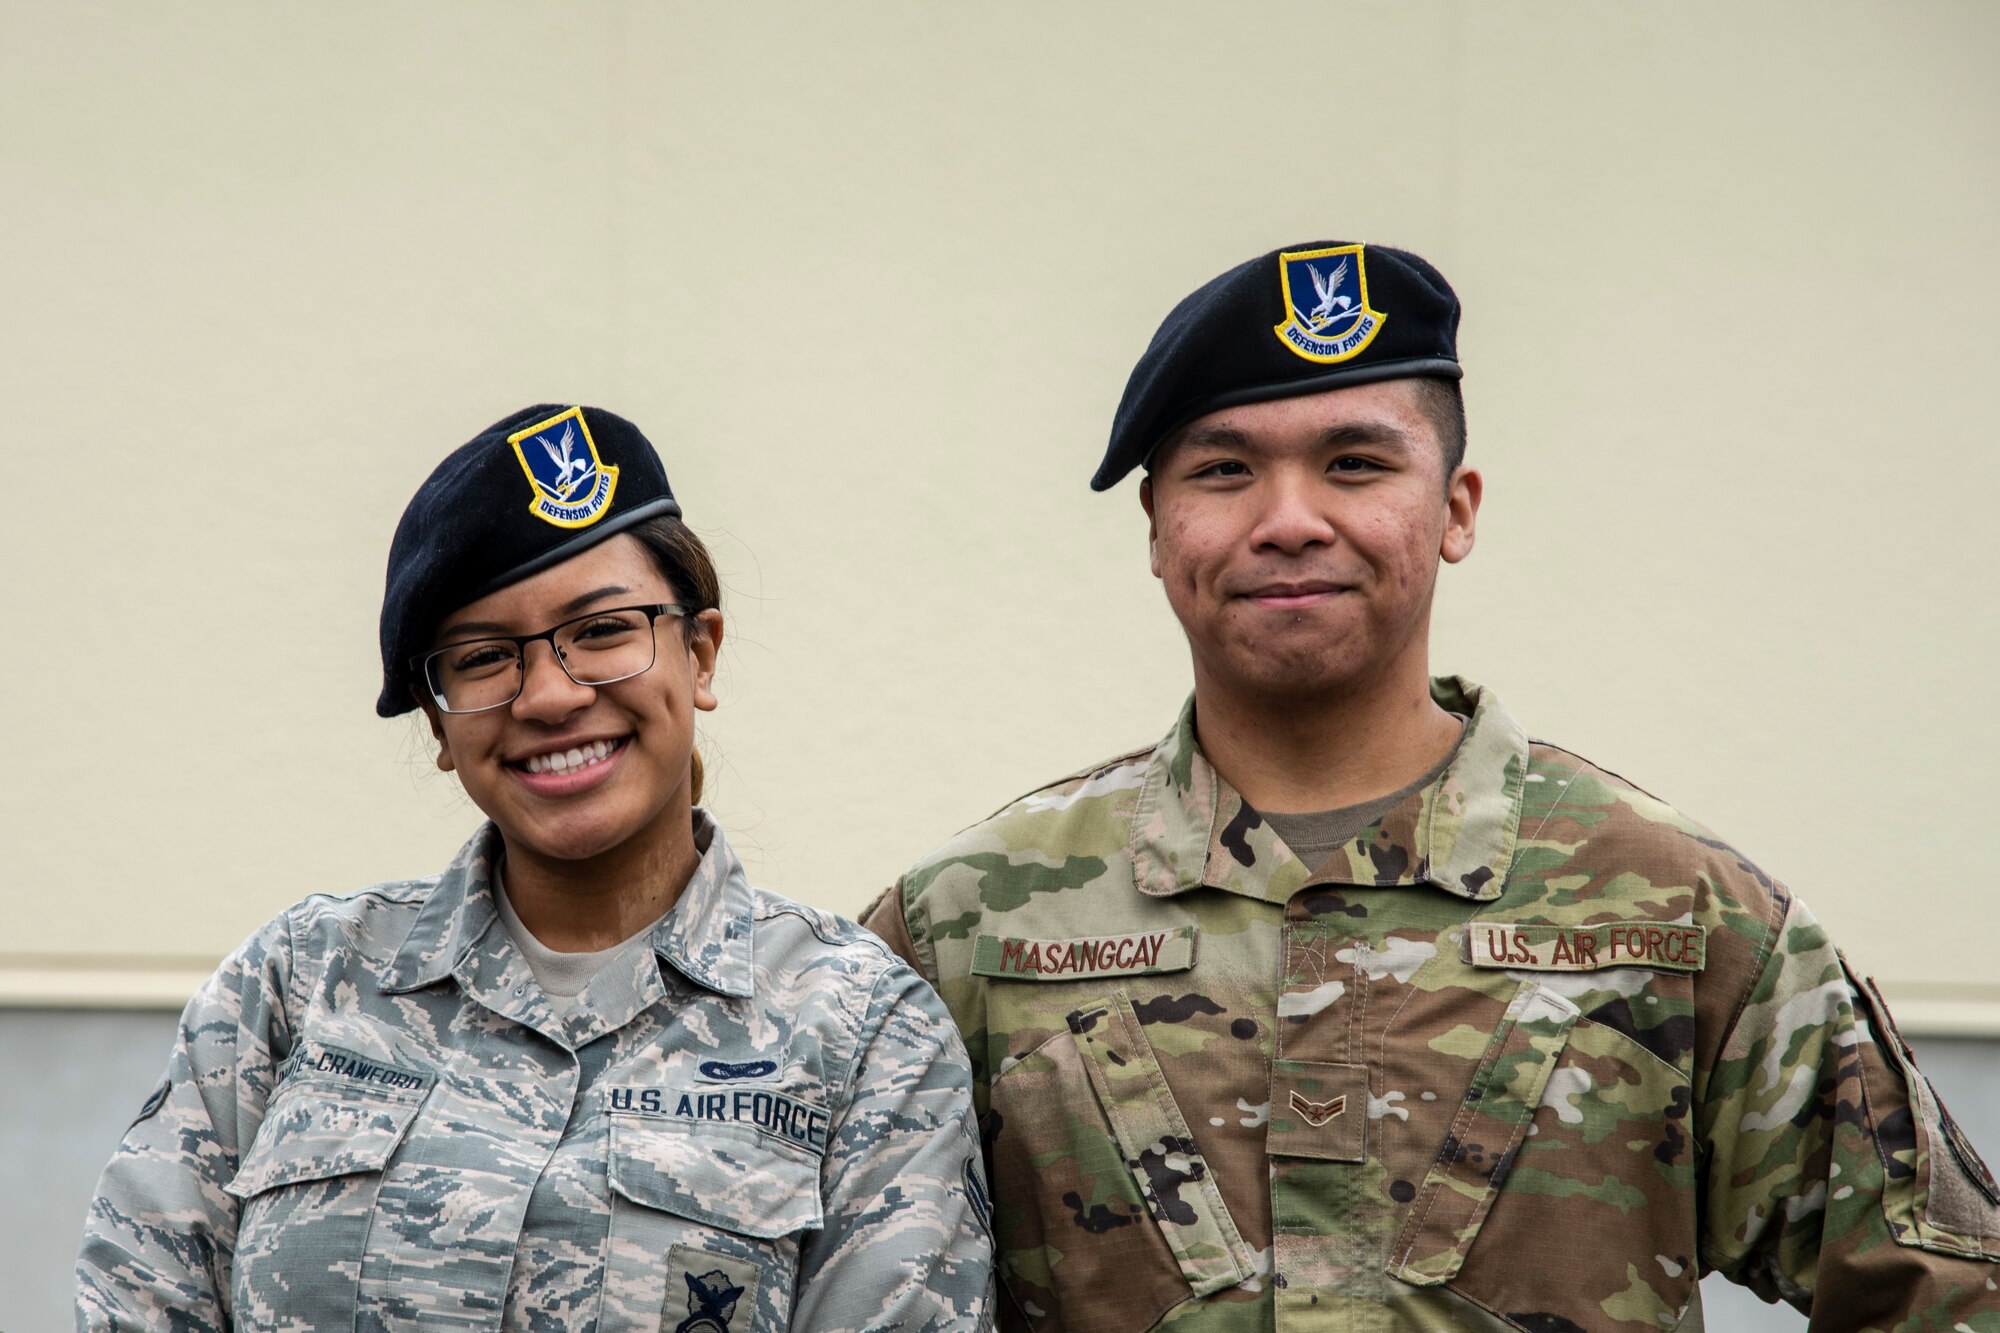 U.S. Air Force Airmen 1st Class Aliciana Infante-Crawford, left, and Jordan Masangcay, right, both 35th Security Forces Squadron armory journeymen, pause for a photo during Police Week 2019 at Misawa Air Base, Japan, May 15, 2019. Former President John F. Kennedy first established National Police Week in 1962 to pay tribute and honor those who made the ultimate sacrifice. The armory protects, secures and maintains over two-million dollars’ worth of weapons, ordinance, vehicles and other resources used in more than 2,500 ceremonies the honor guard performs yearly. (U.S. Air Force photo by Airman China Shock)